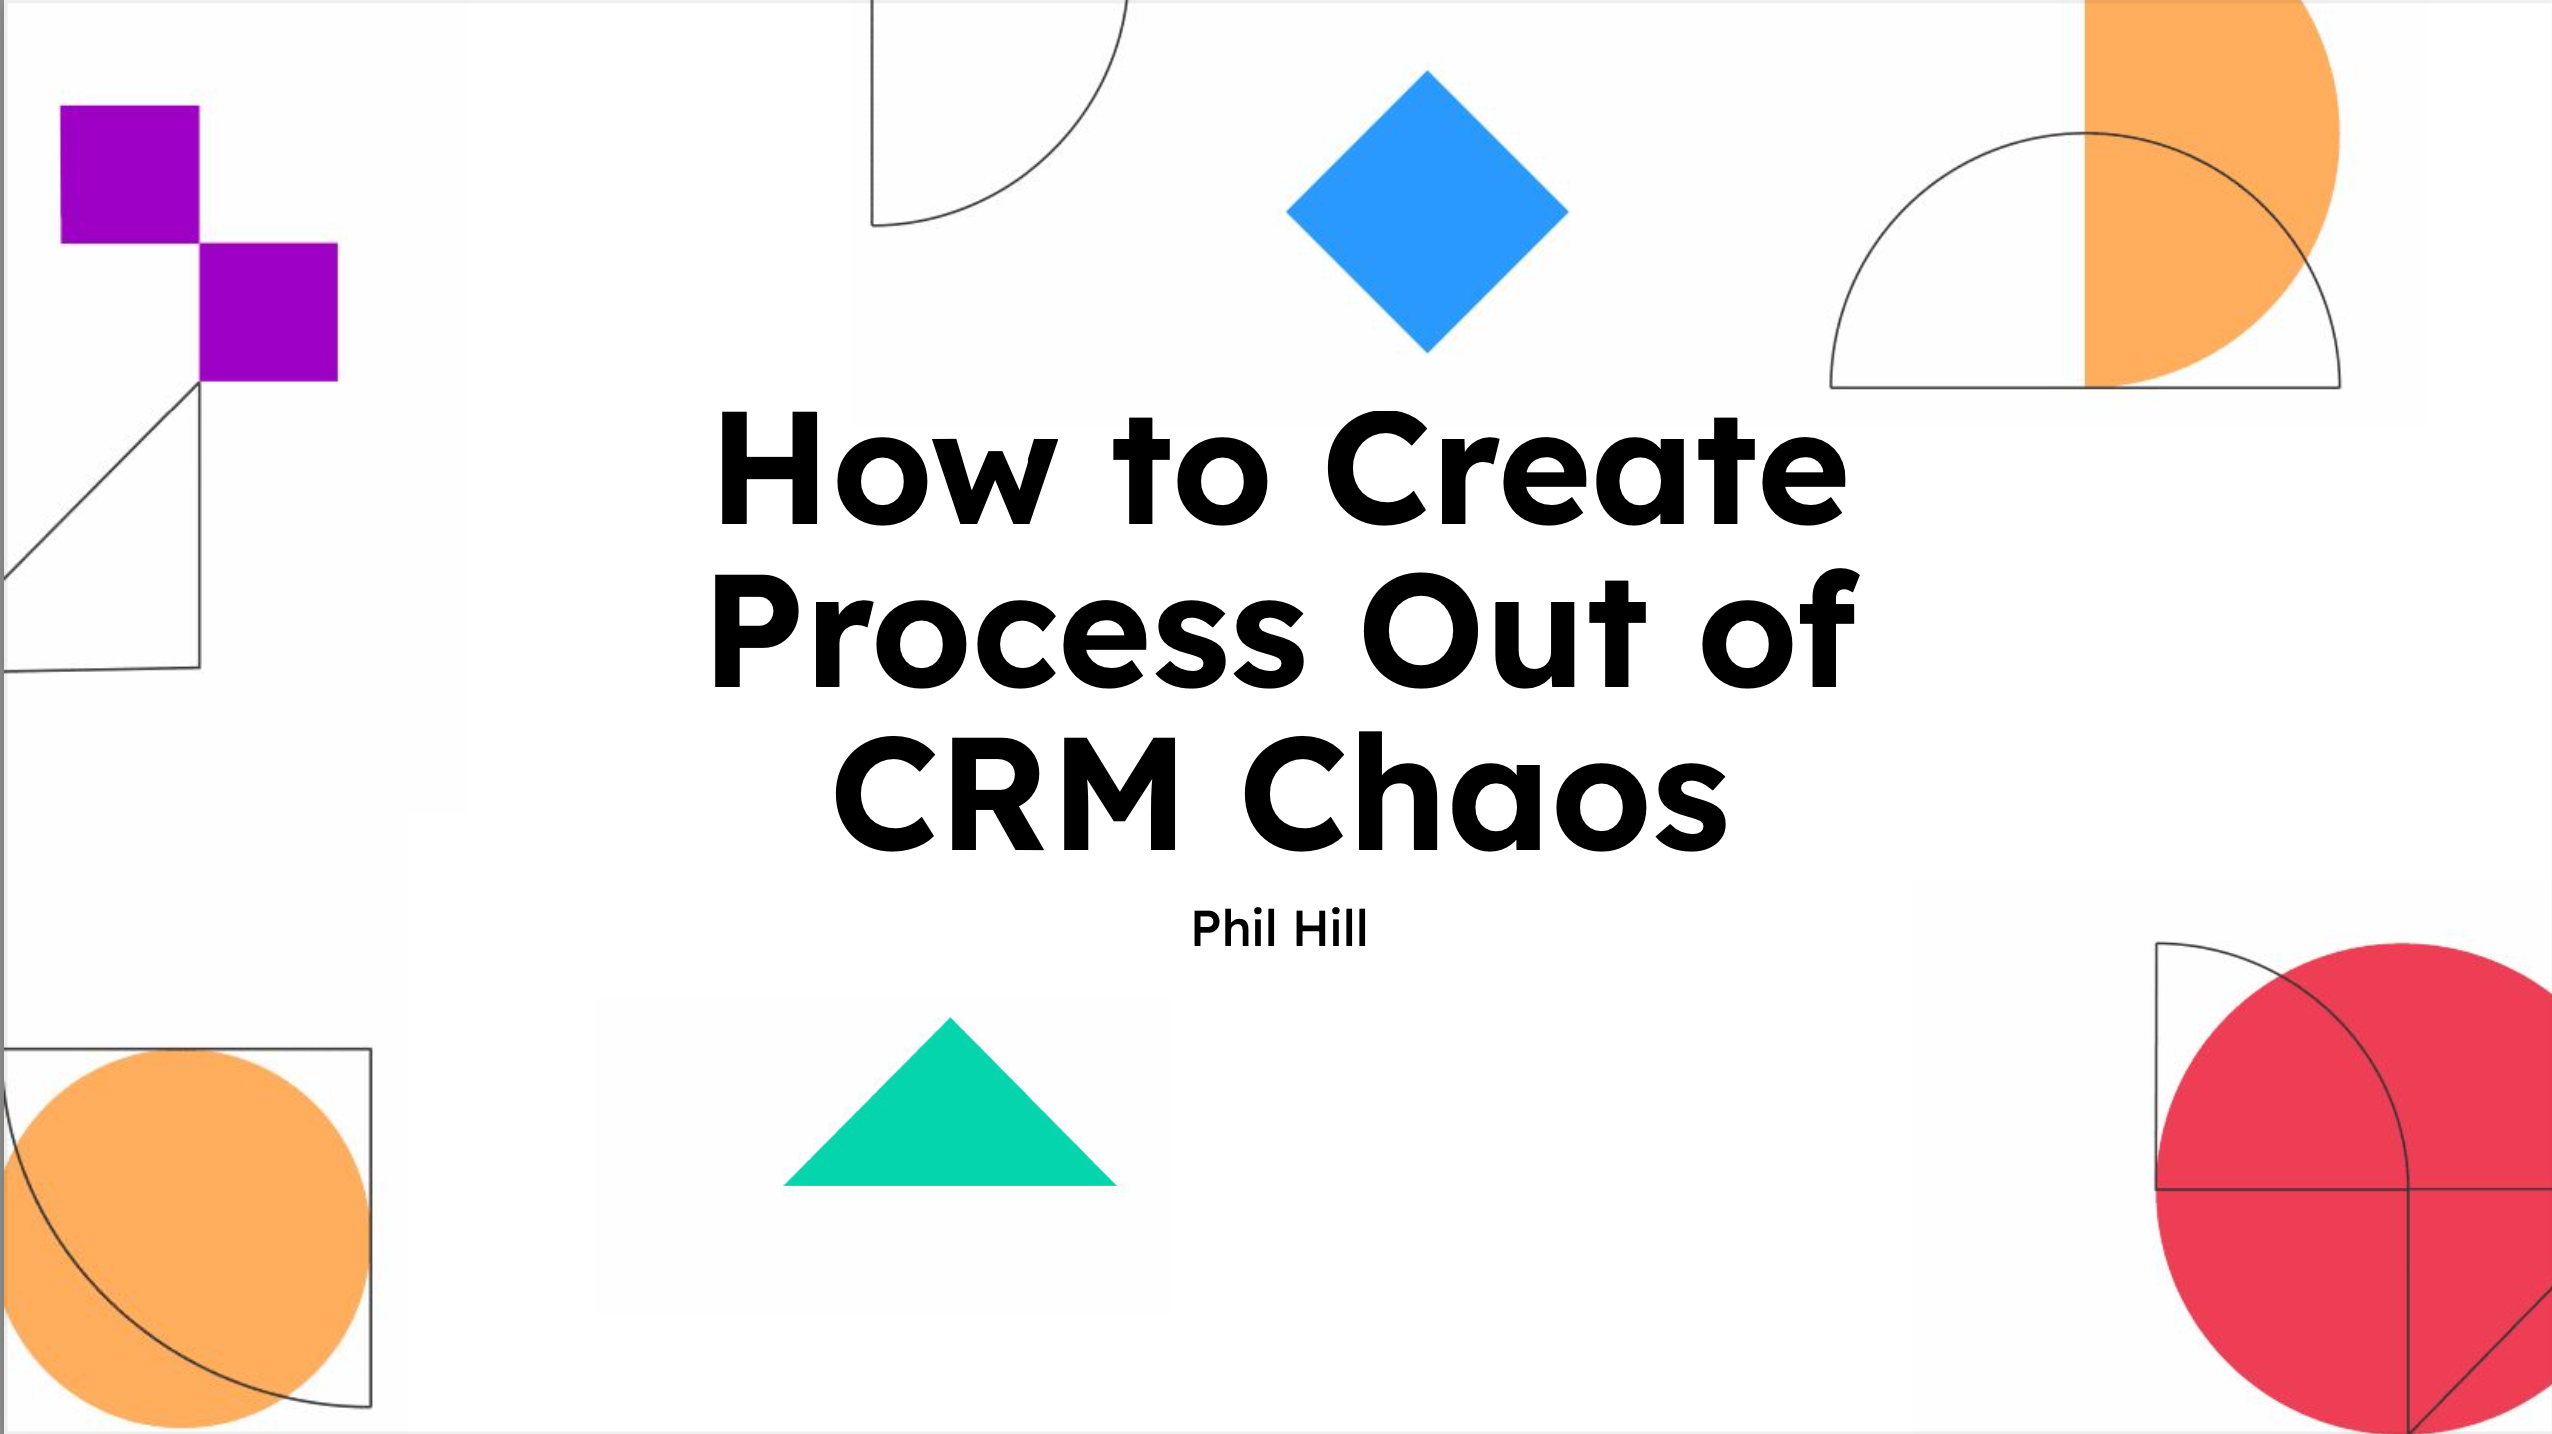 How to Create Process Out of CRM Chaos